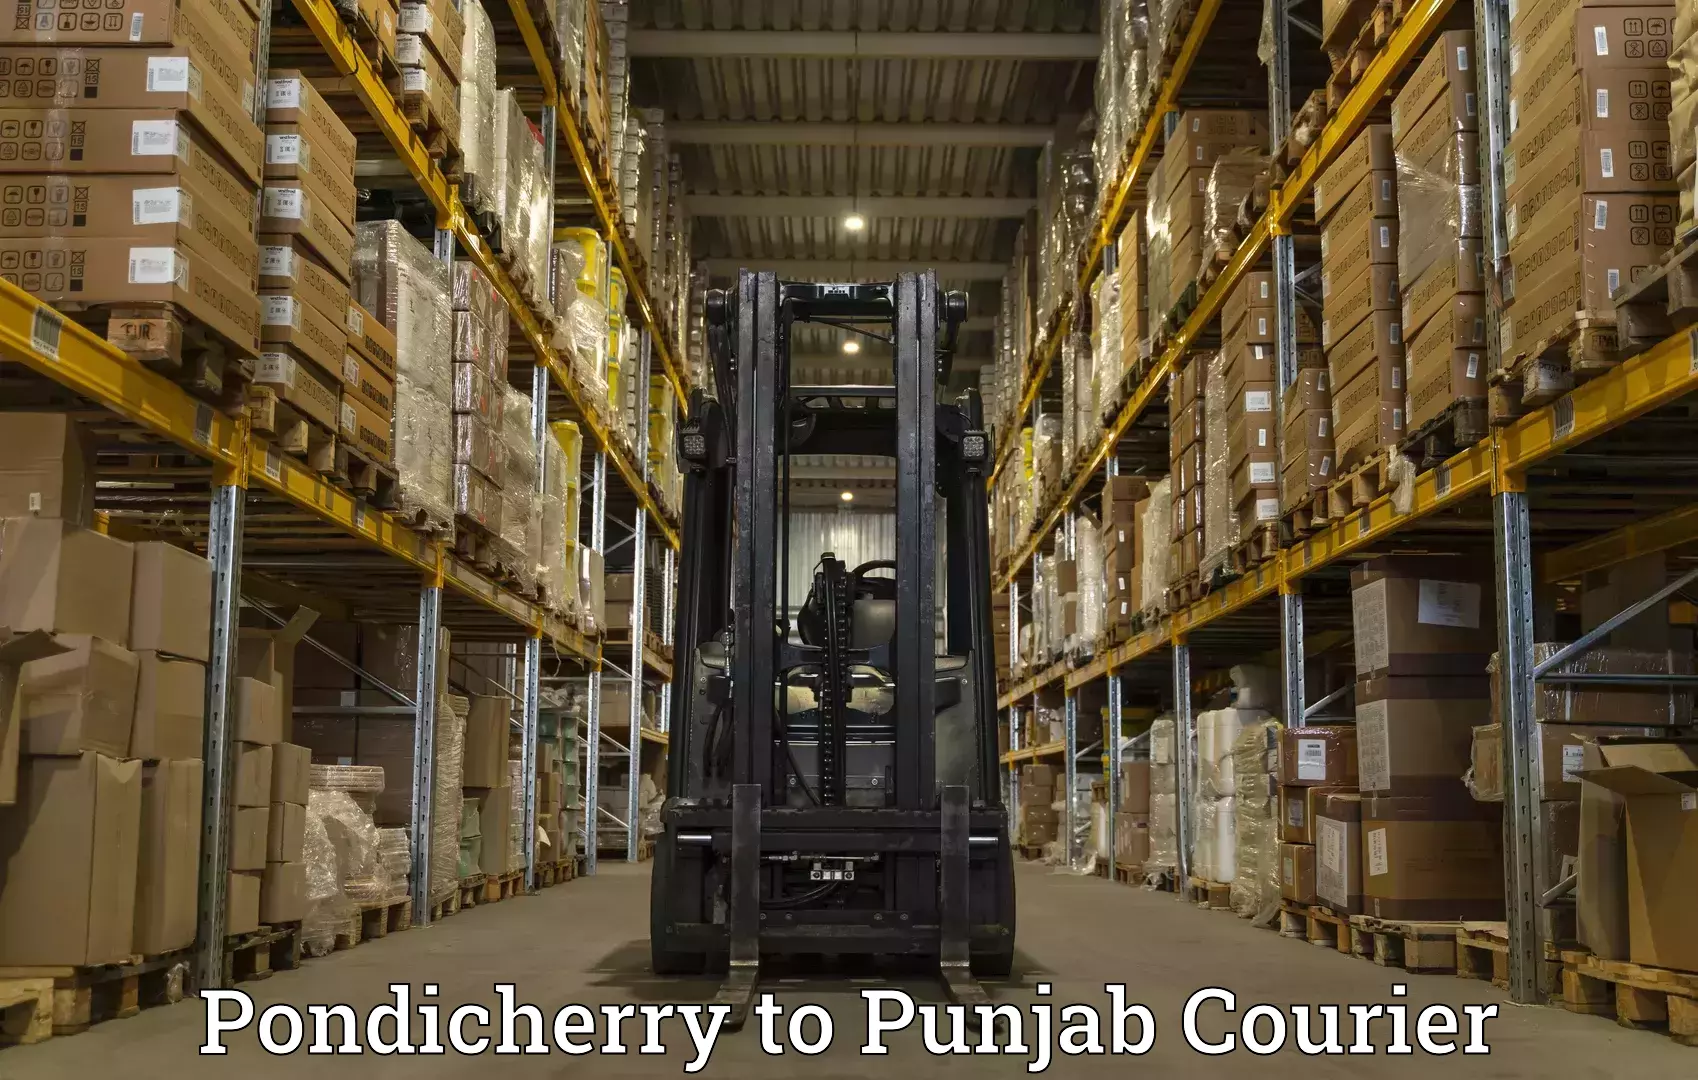 Scheduled delivery in Pondicherry to Central University of Punjab Bathinda